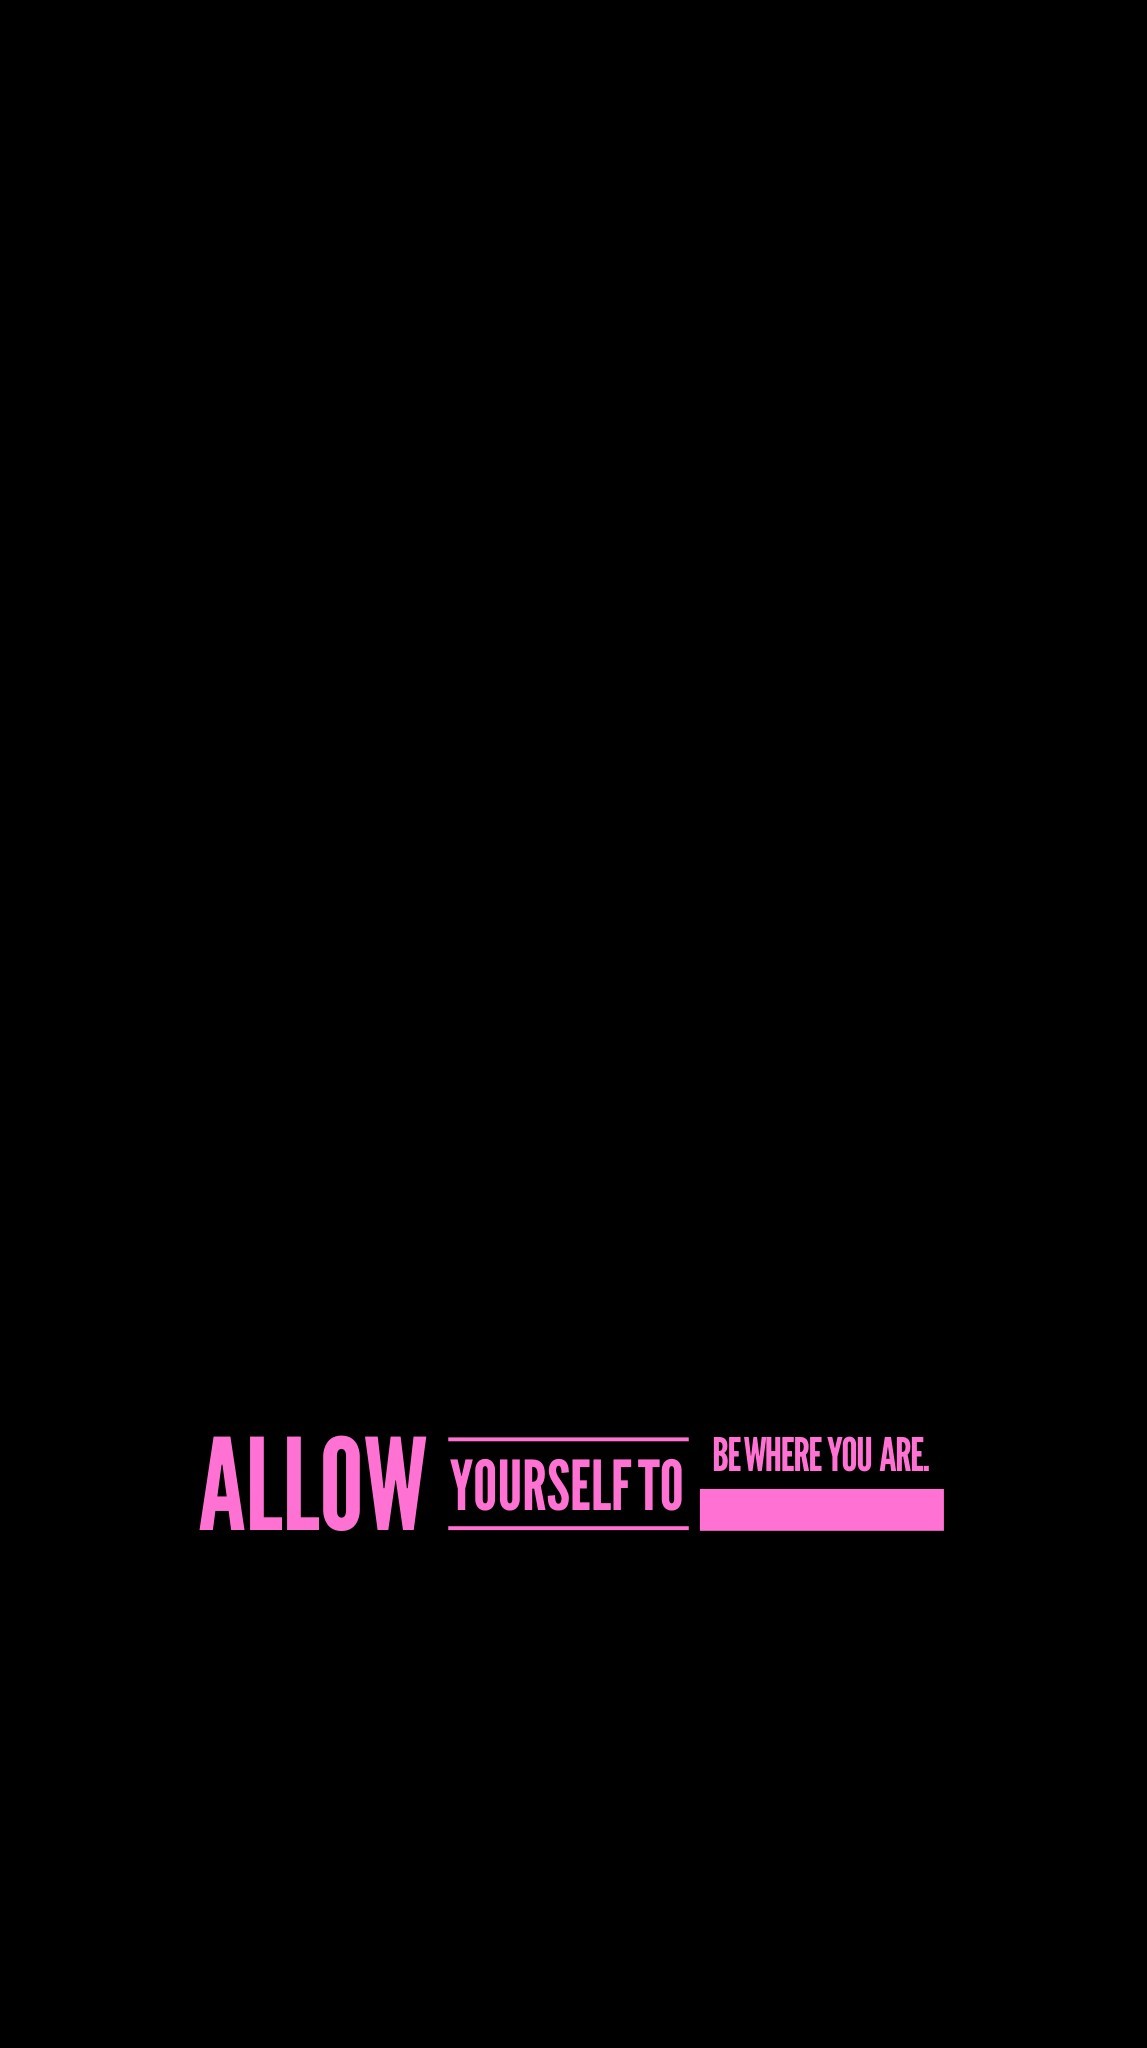 1147x2048 wallpaper, iPhone, Android, background, quote, simple, black, pink